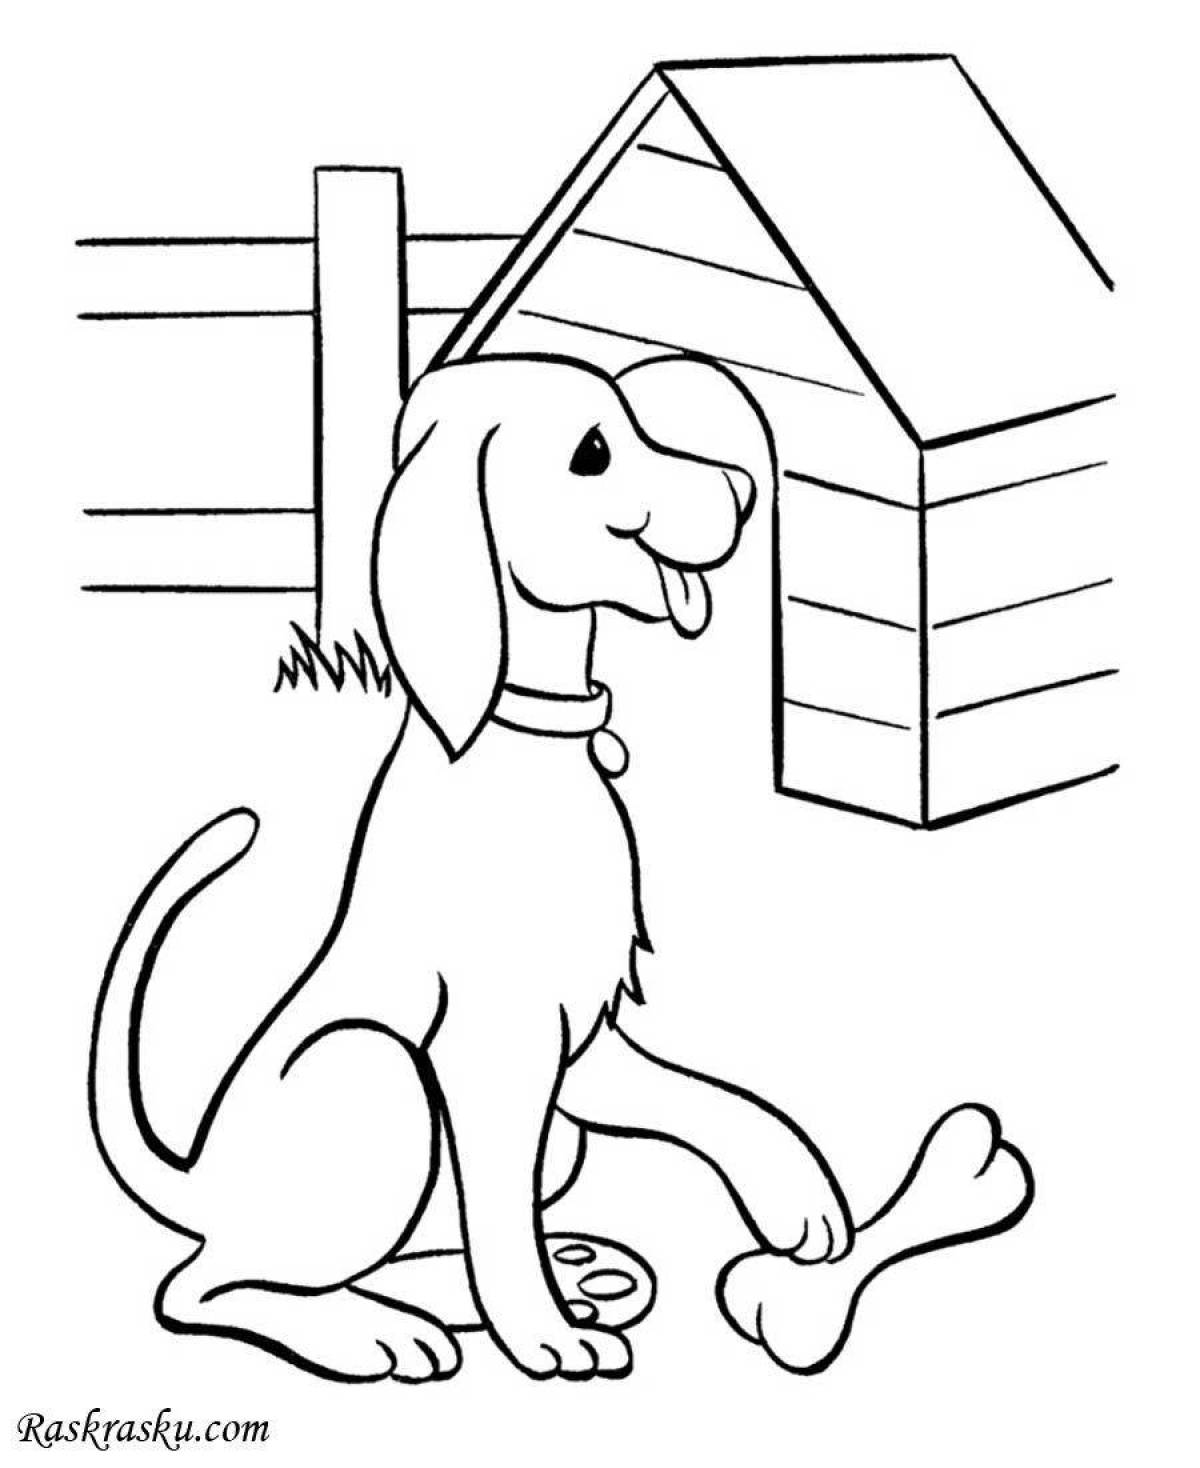 A curious dog coloring book for kids